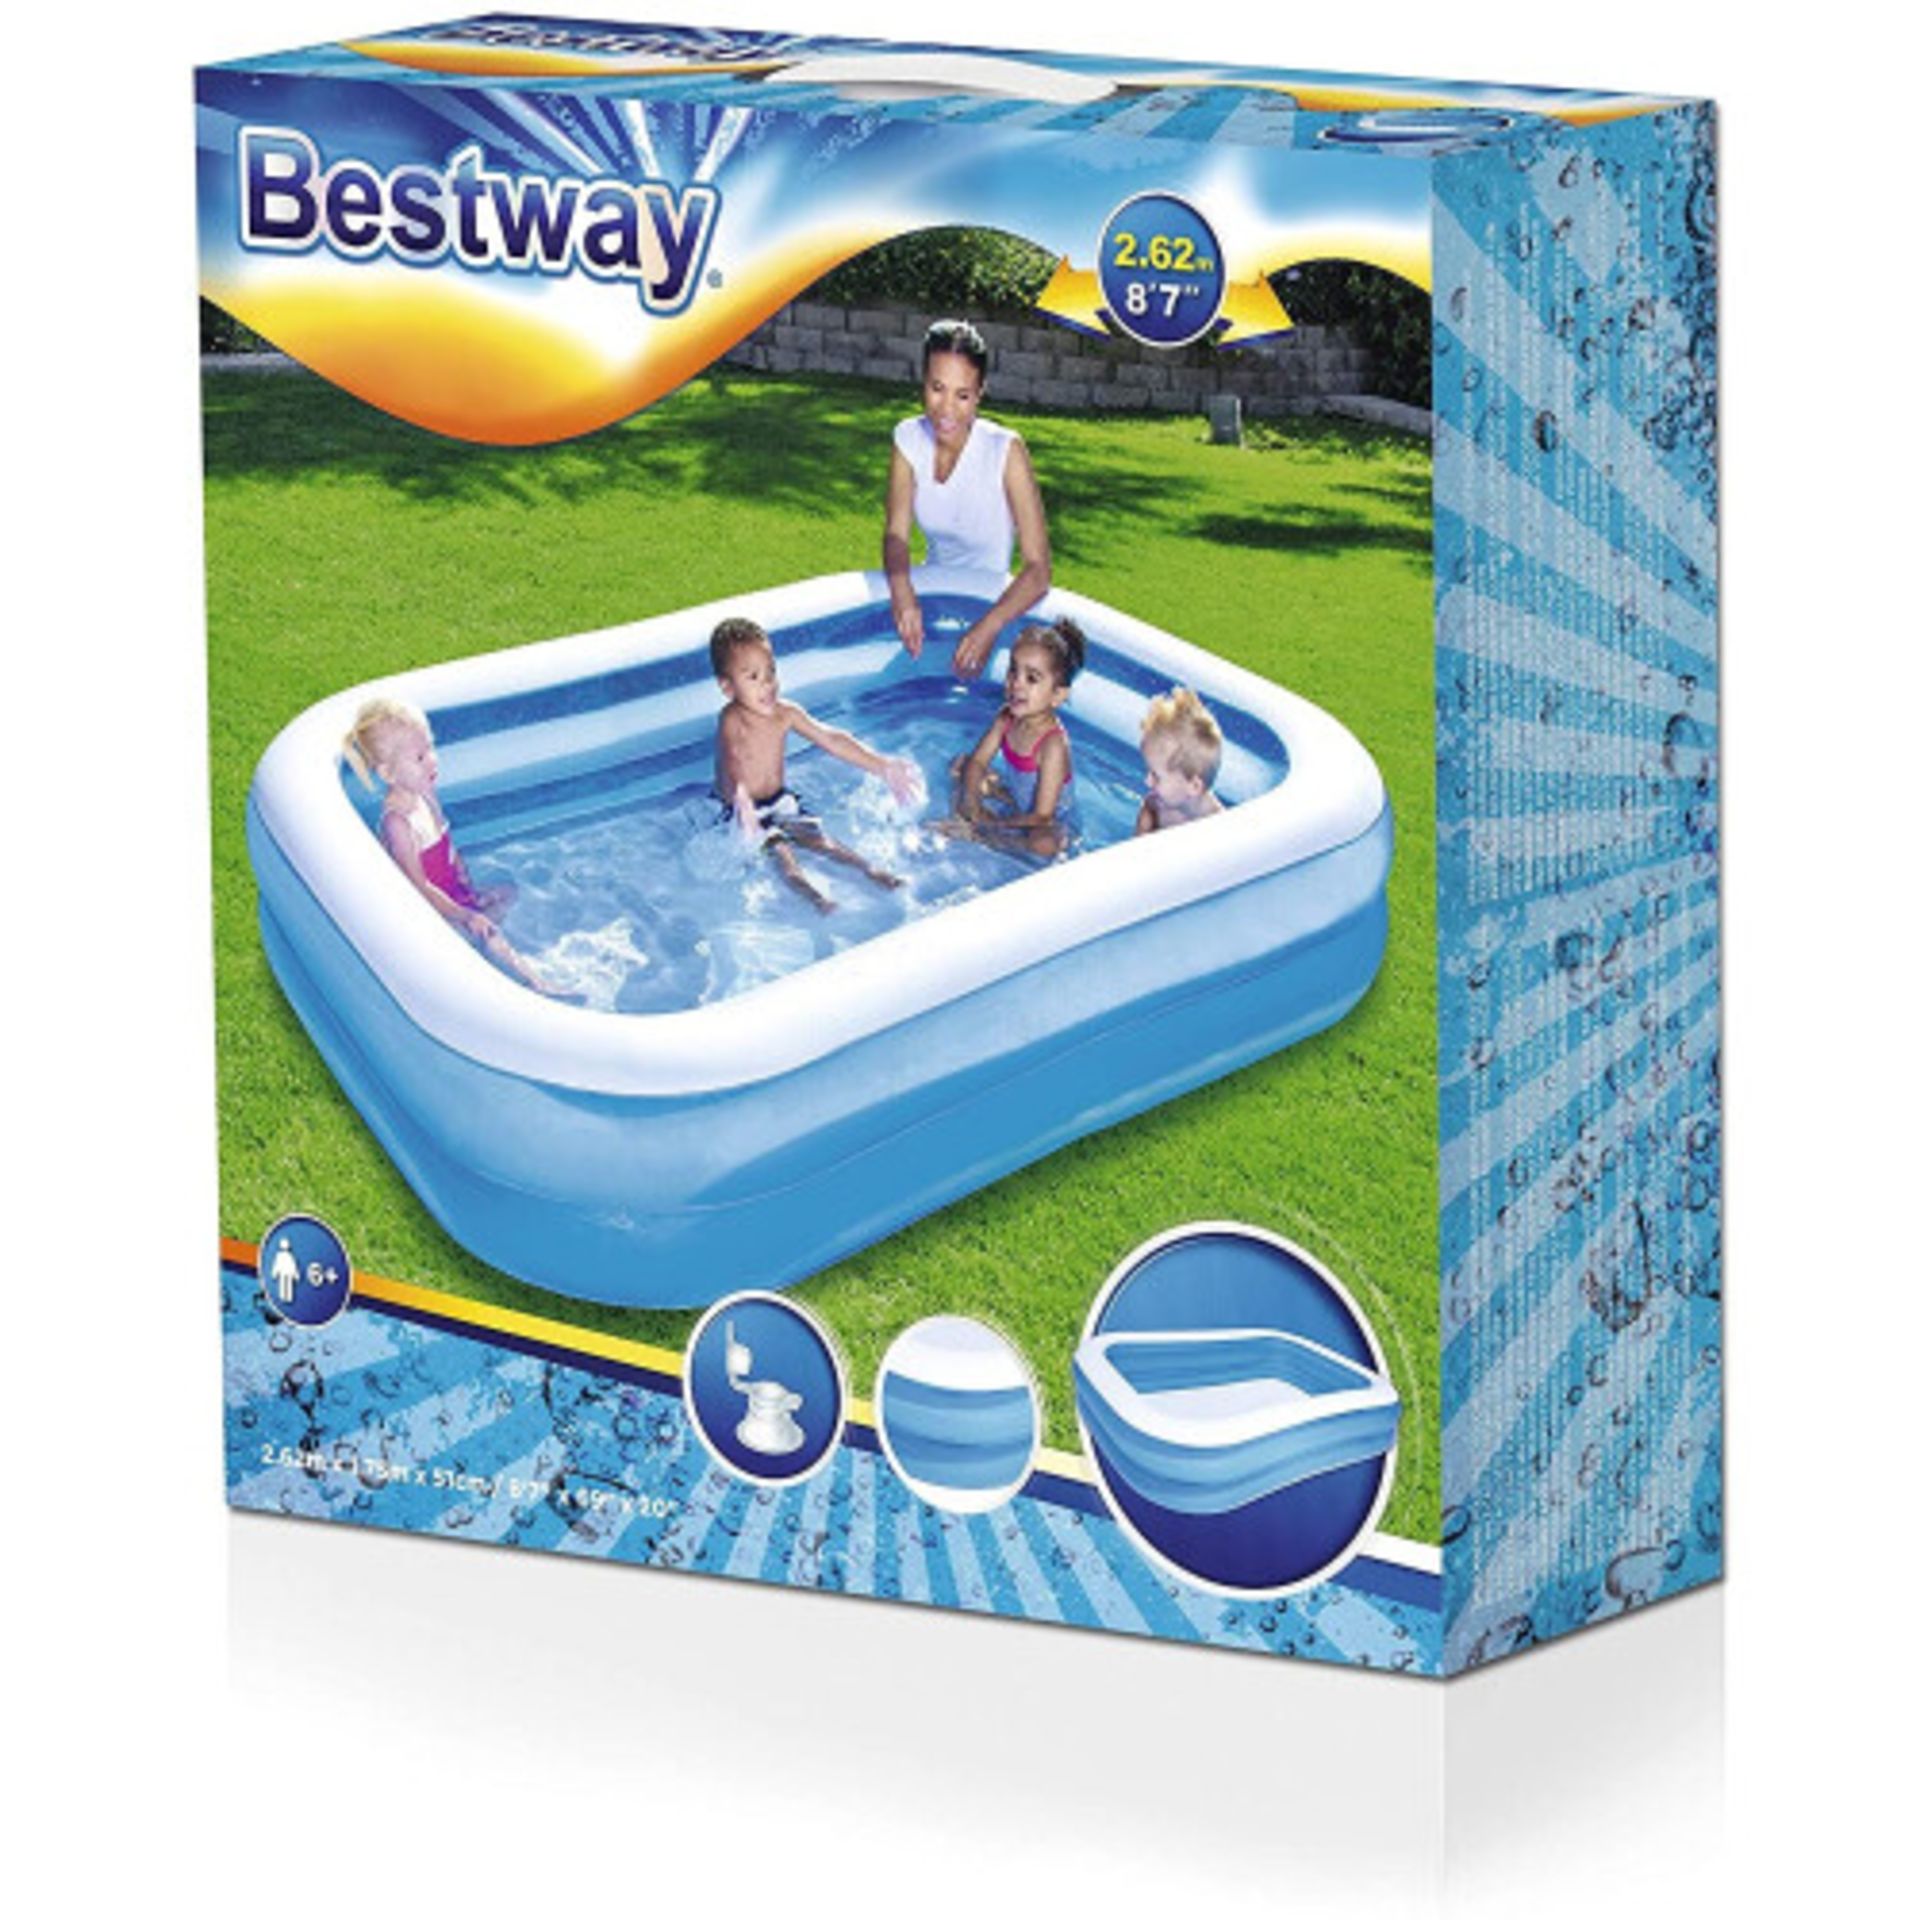 3 X BRAND NEW BESTWAY SPLASH AND PLAY LARGE FAMILY INFLATABLE POOL - IN 1 BOX (CODE : 54006 ) -